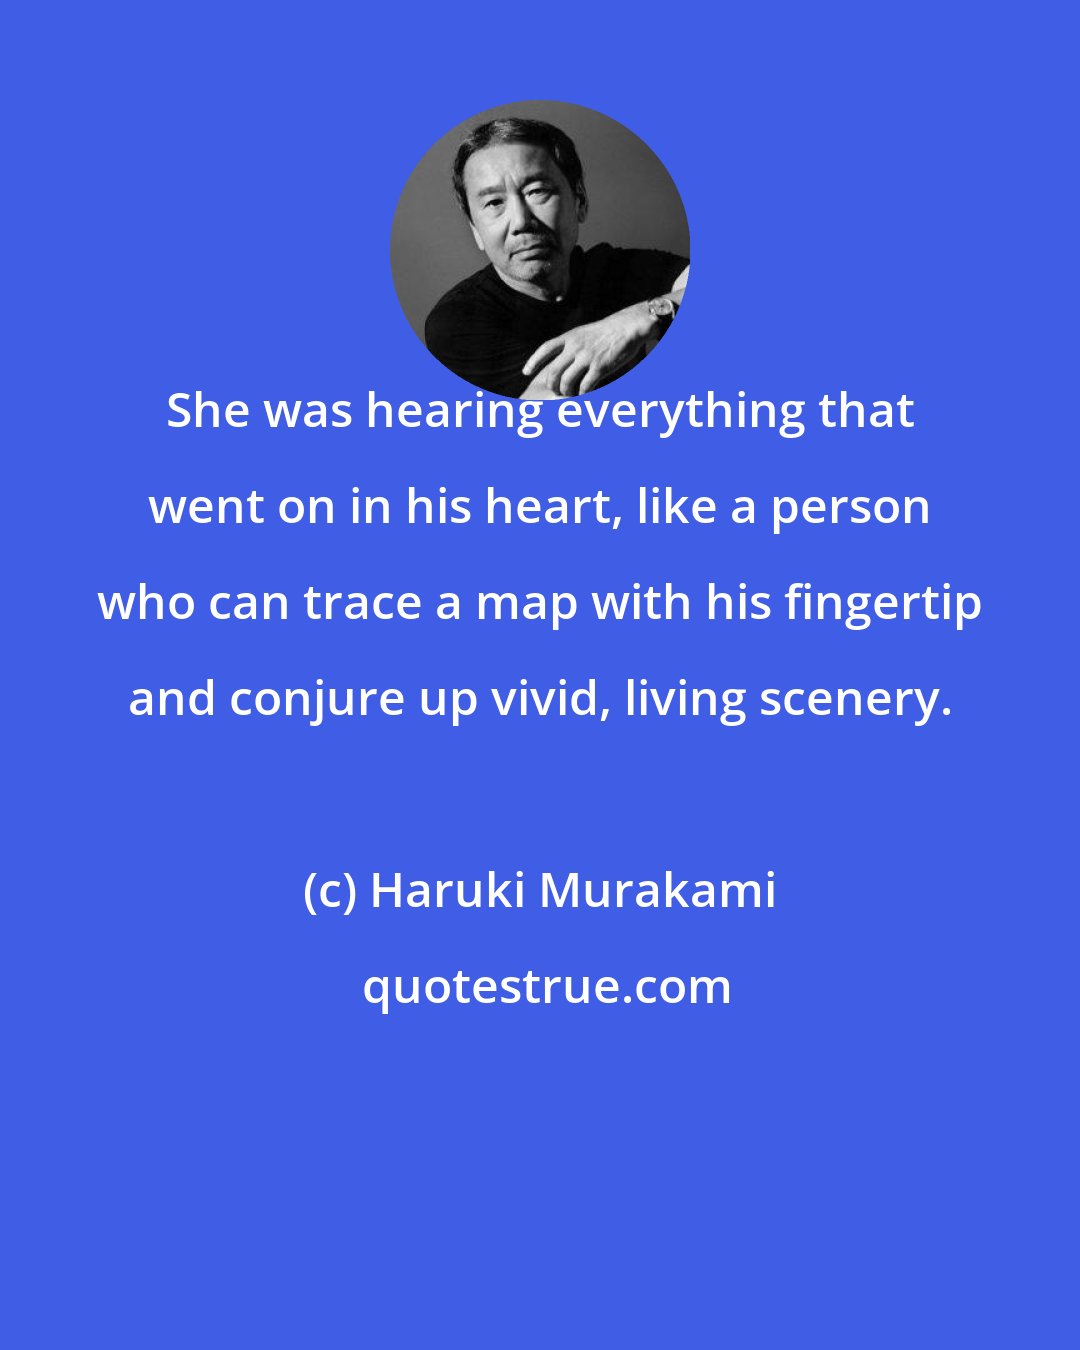 Haruki Murakami: She was hearing everything that went on in his heart, like a person who can trace a map with his fingertip and conjure up vivid, living scenery.